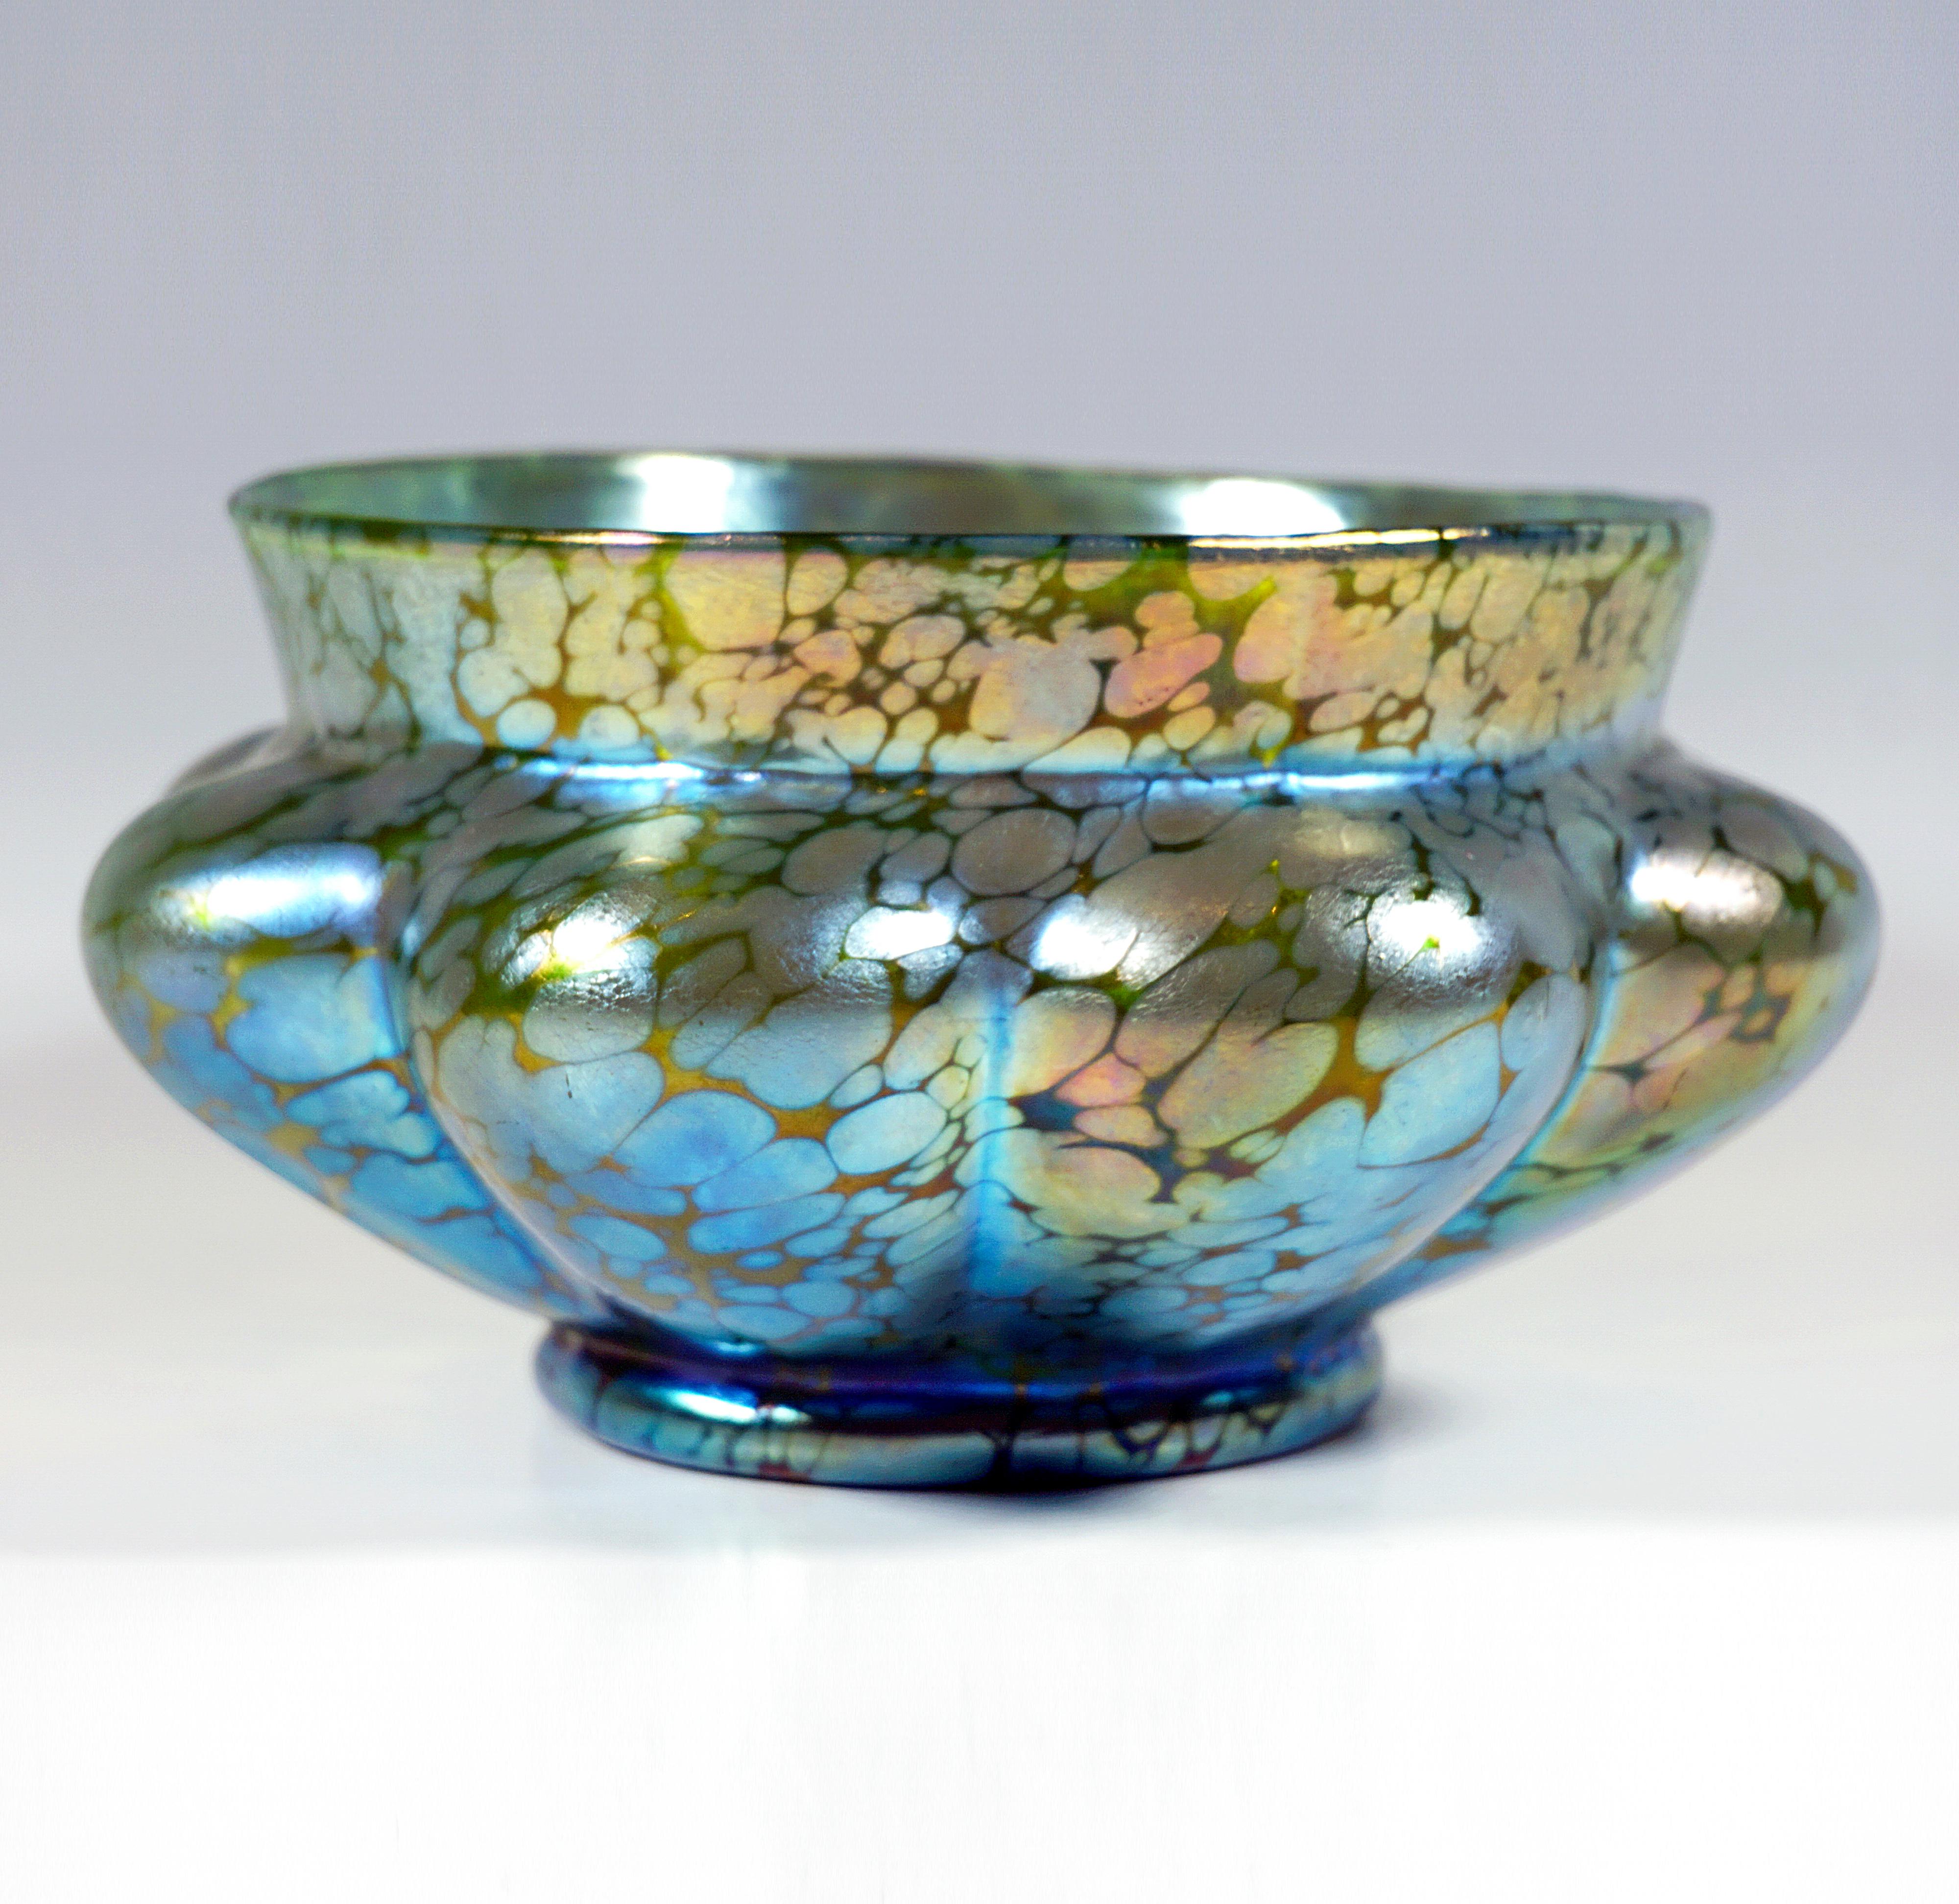 Finest Bohemian Art Nouveau Glass Item:
Mould blown, wide bowl on a stand ring, eightfold ribbed, outwardly curved wall with humped protuberances, tamed by a smooth, slightly outwardly turned mouth rim, ground and polished pontil on the